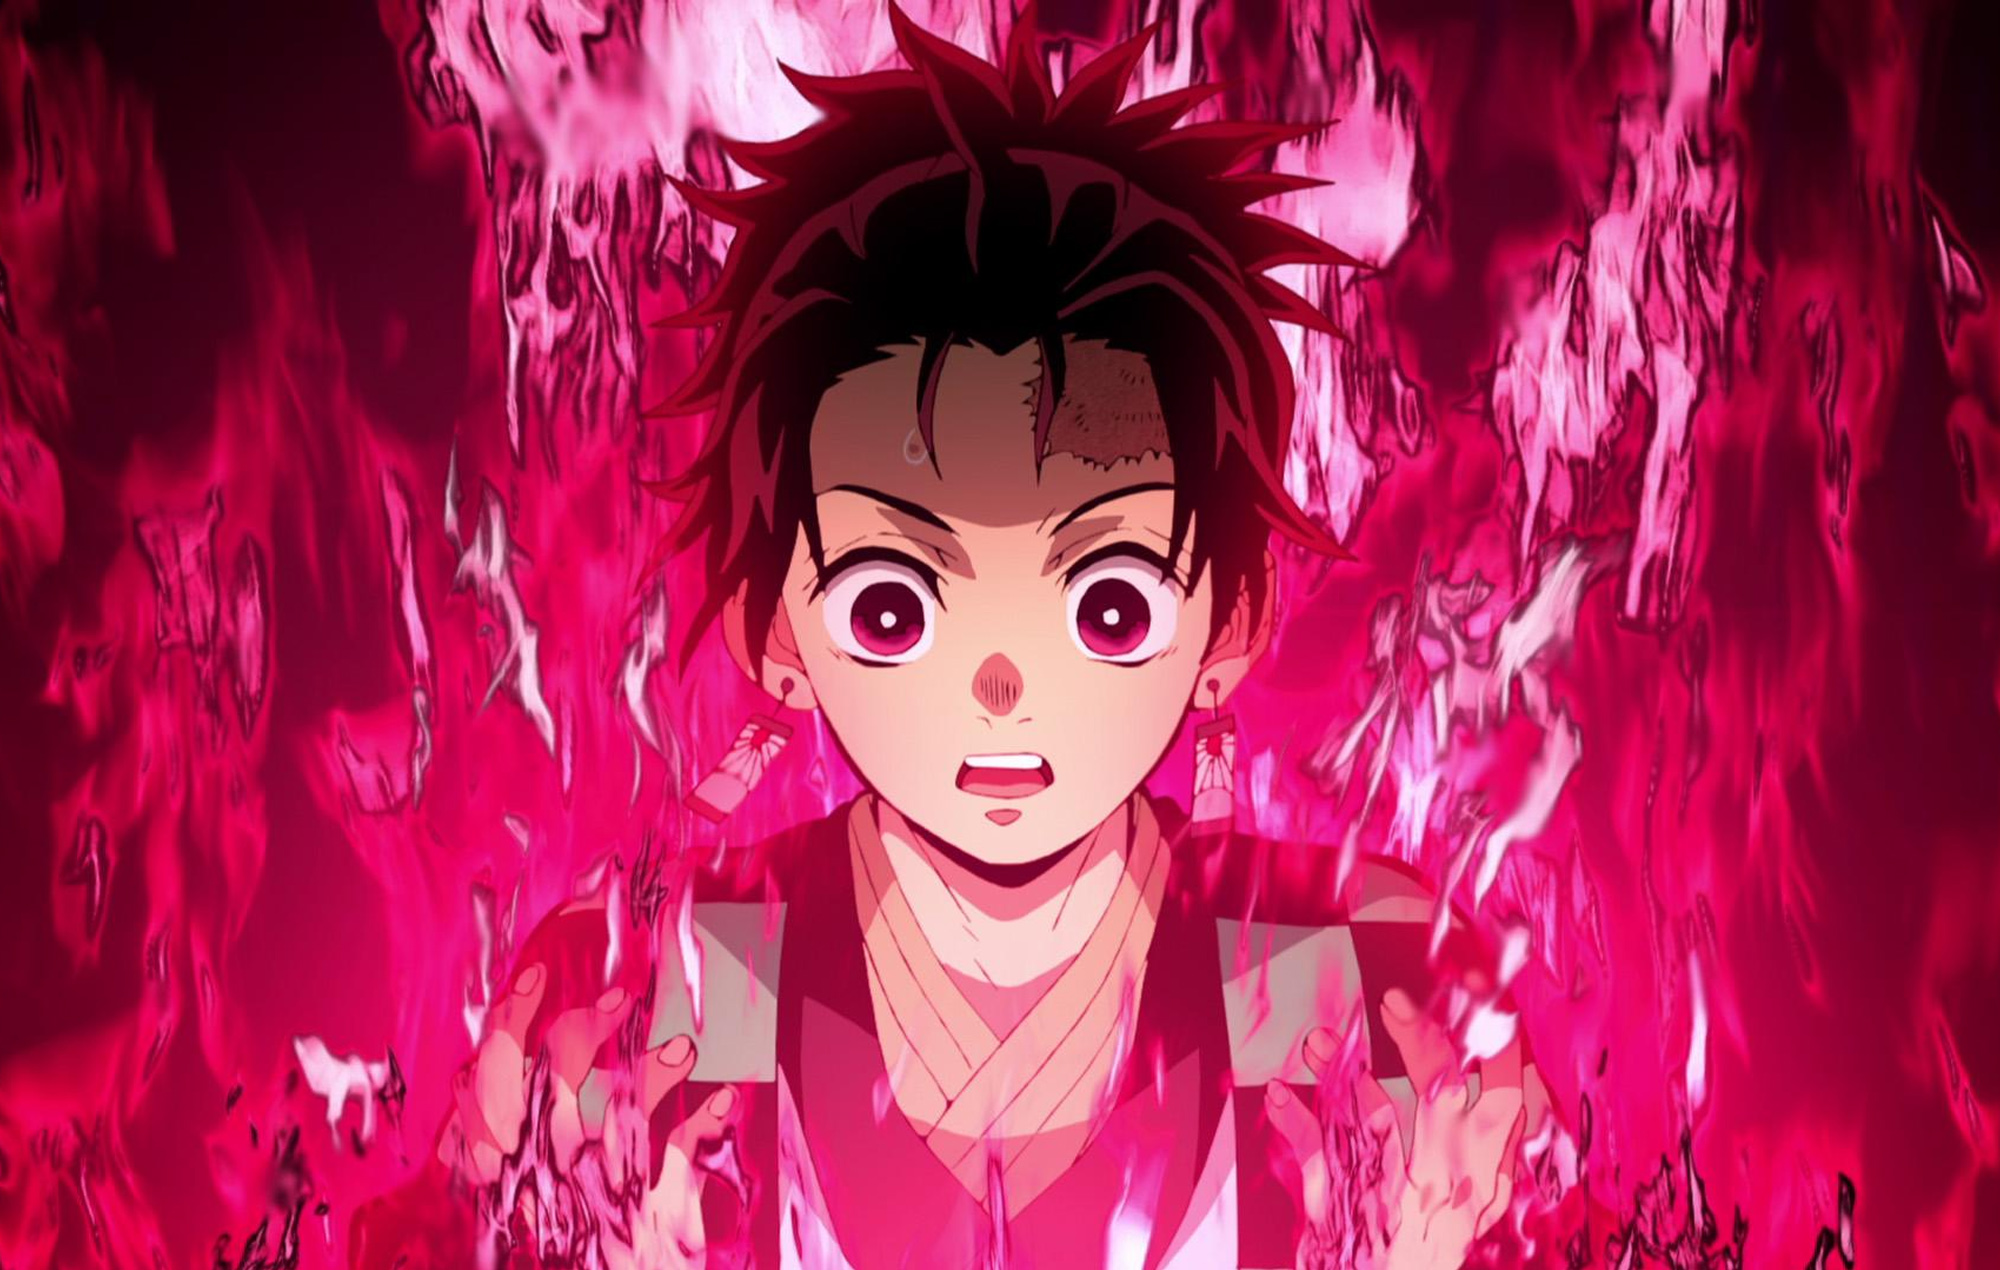 Demon Slayer' season 2: release date, plot details, and everything we know so far